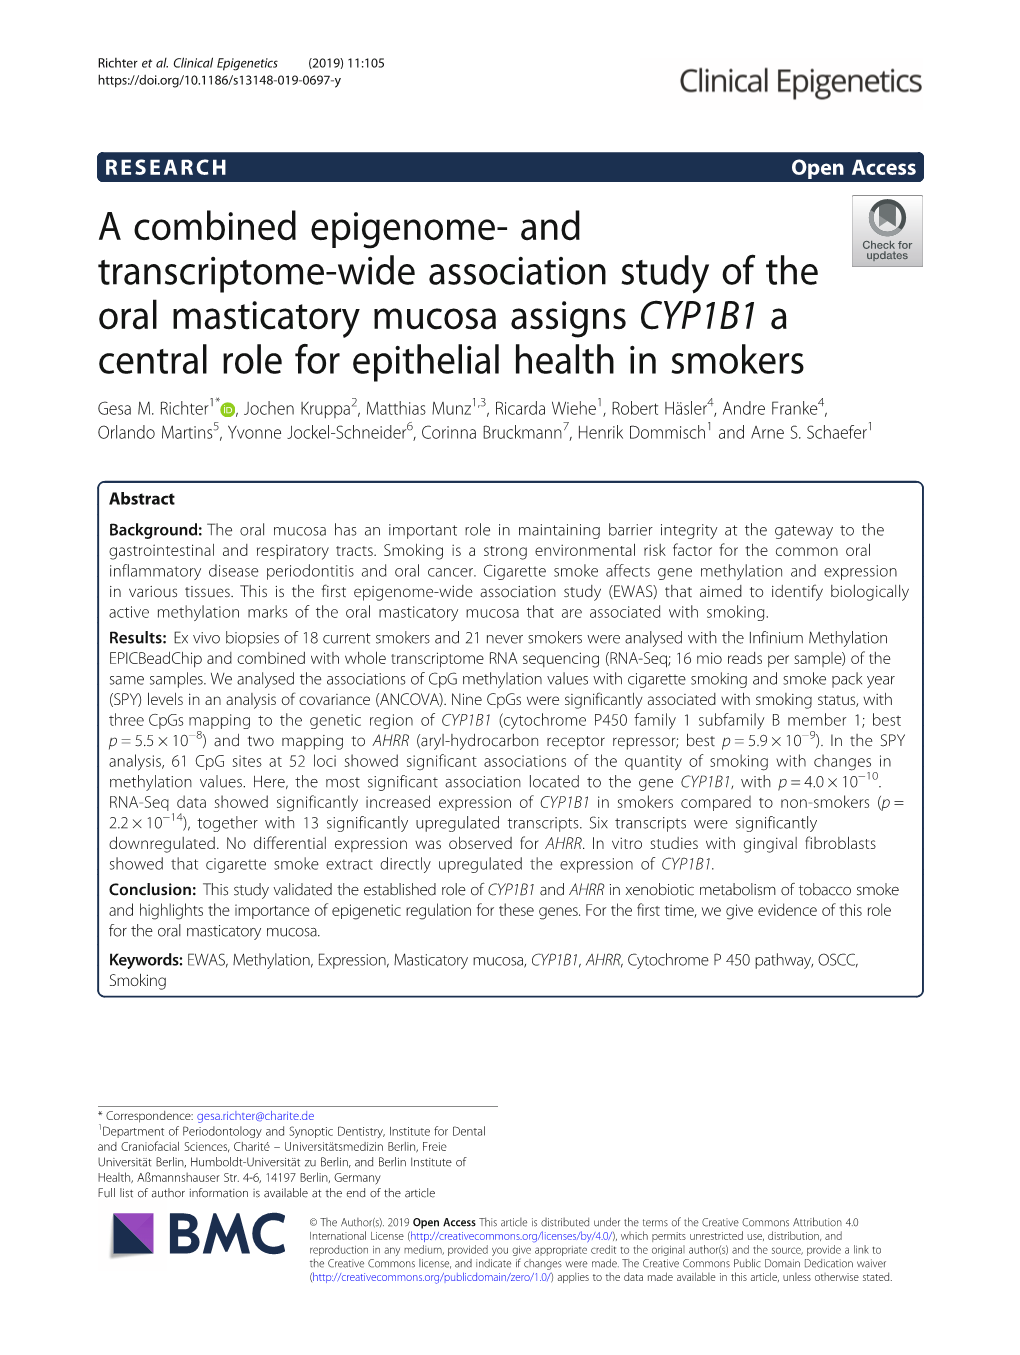 And Transcriptome-Wide Association Study of the Oral Masticatory Mucosa Assigns CYP1B1 a Central Role for Epithelial Health in Smokers Gesa M